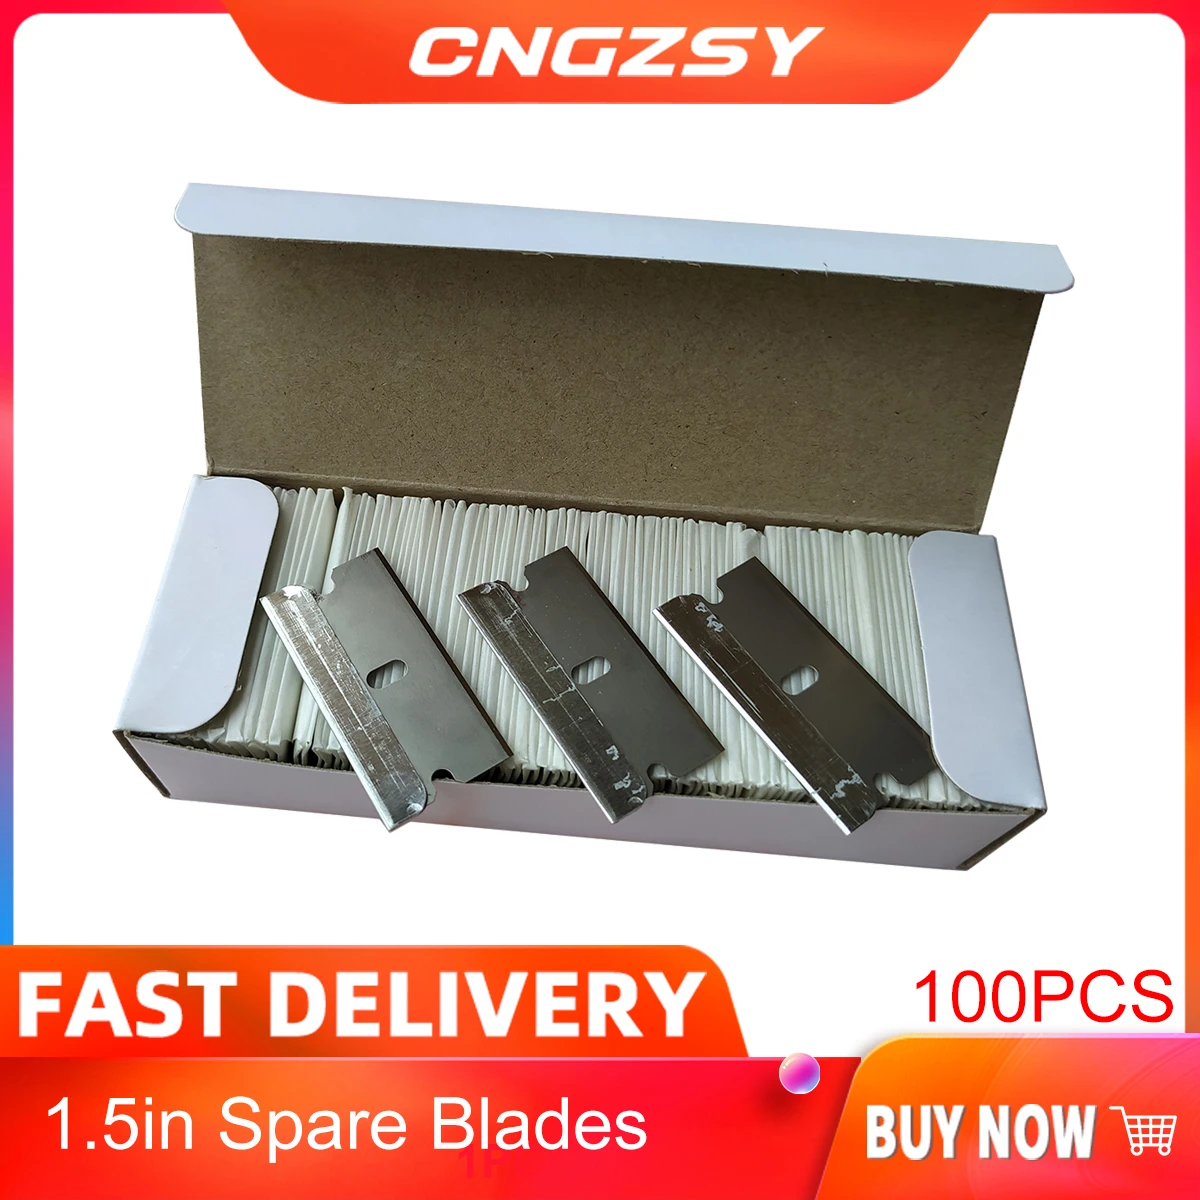 CNGZSY 100pcs Metal Blades Safety Razor Scraper Glue Knife Glass Cleaner Replacement Carbon Steel Blade Car Tinting Tools E13